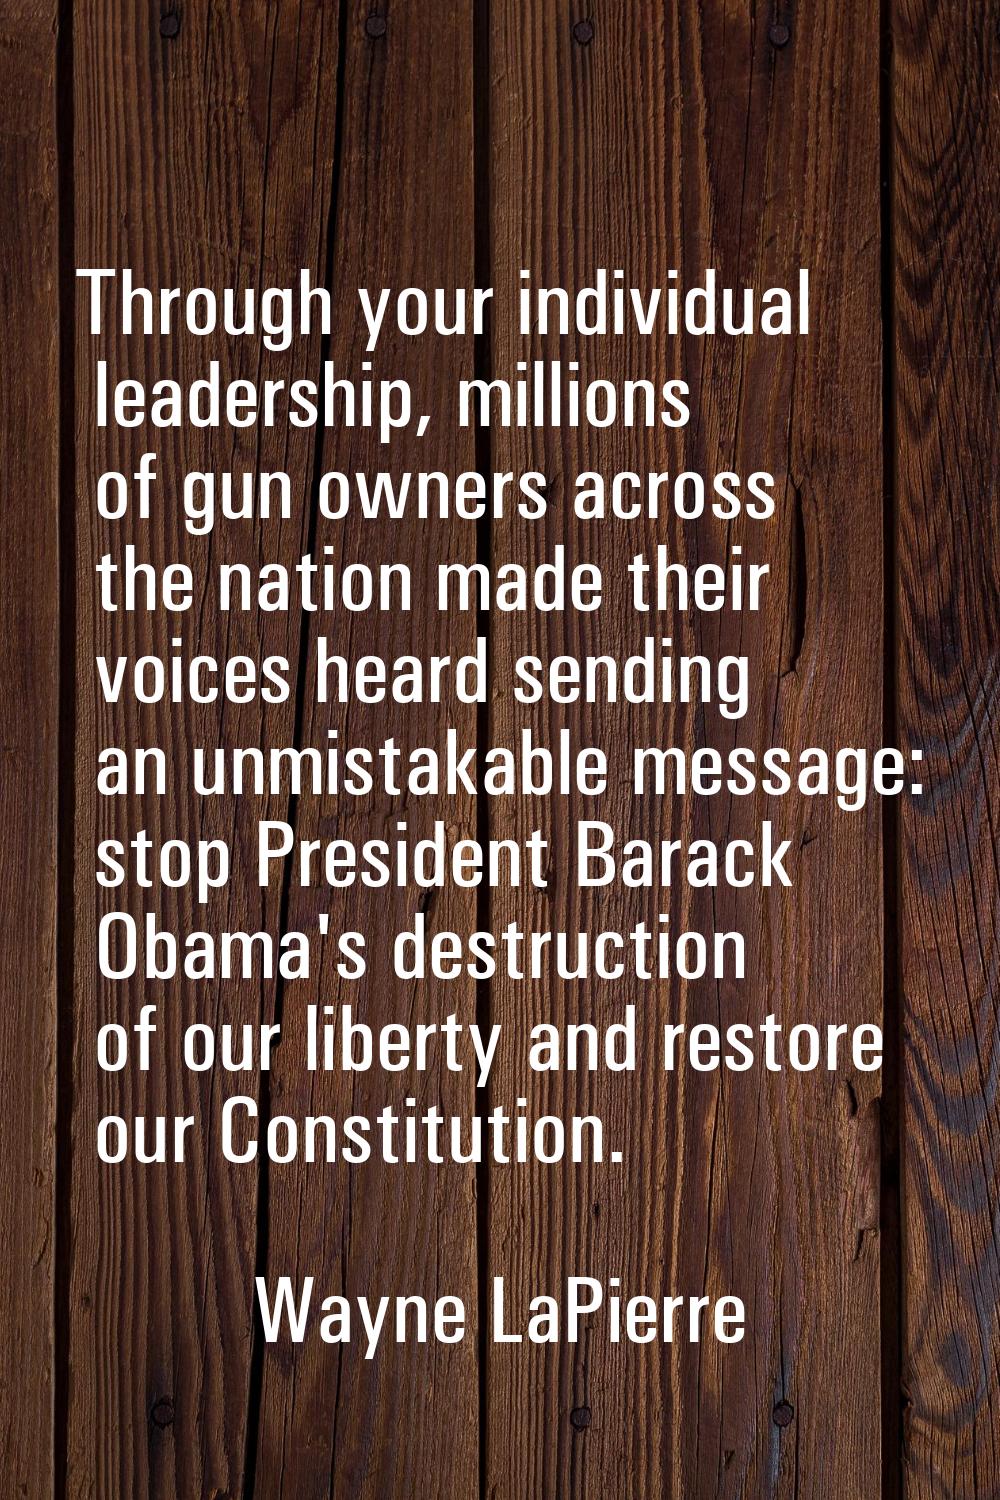 Through your individual leadership, millions of gun owners across the nation made their voices hear